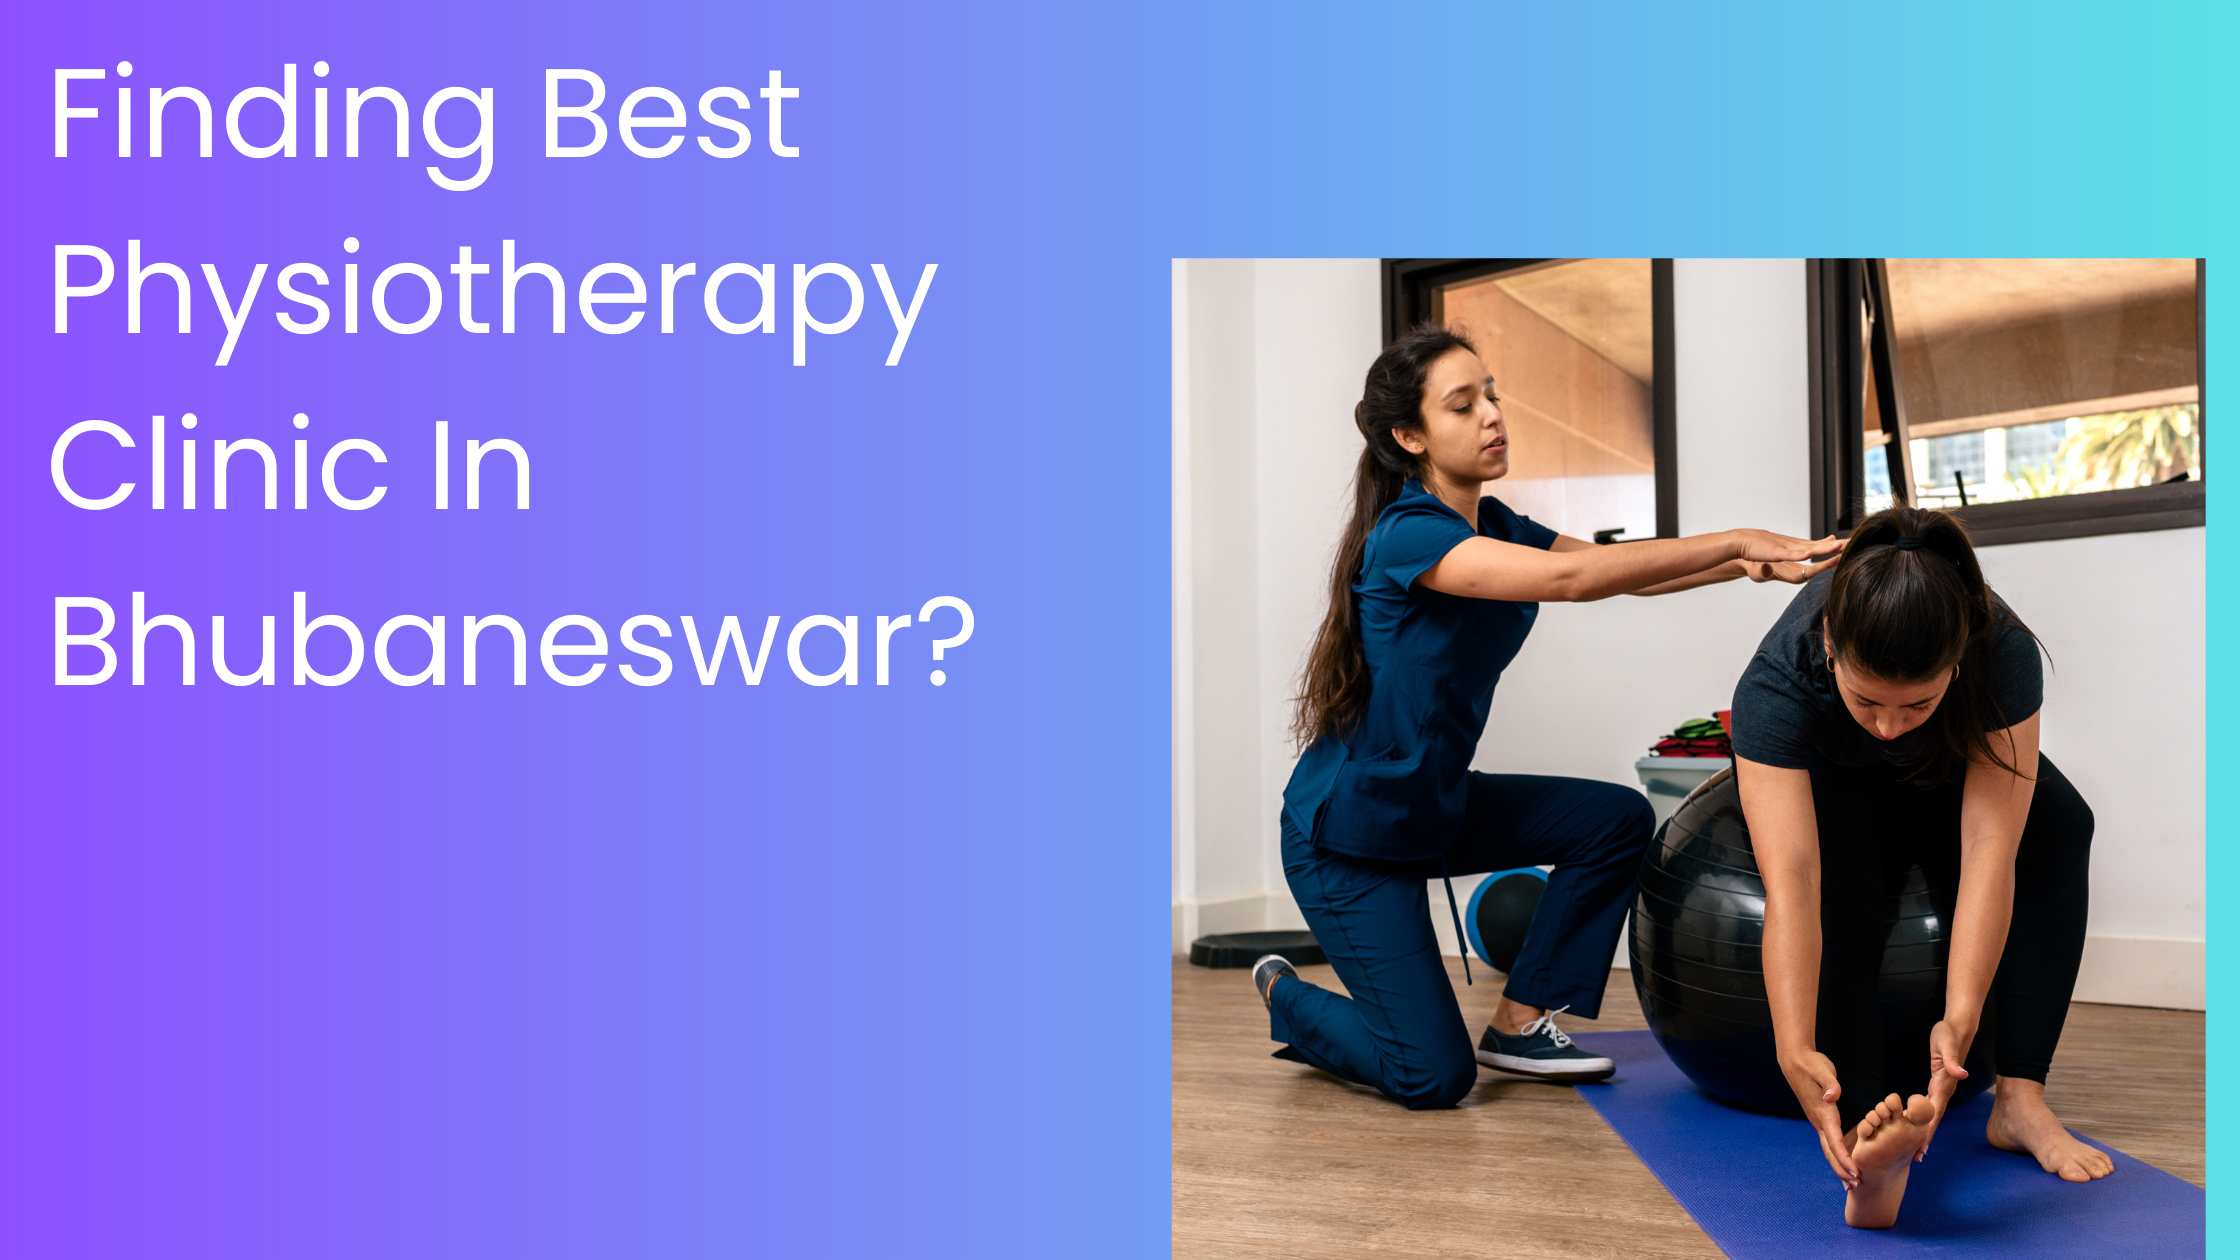 Finding Best Physiotherapy Clinic In Bhubaneswar?